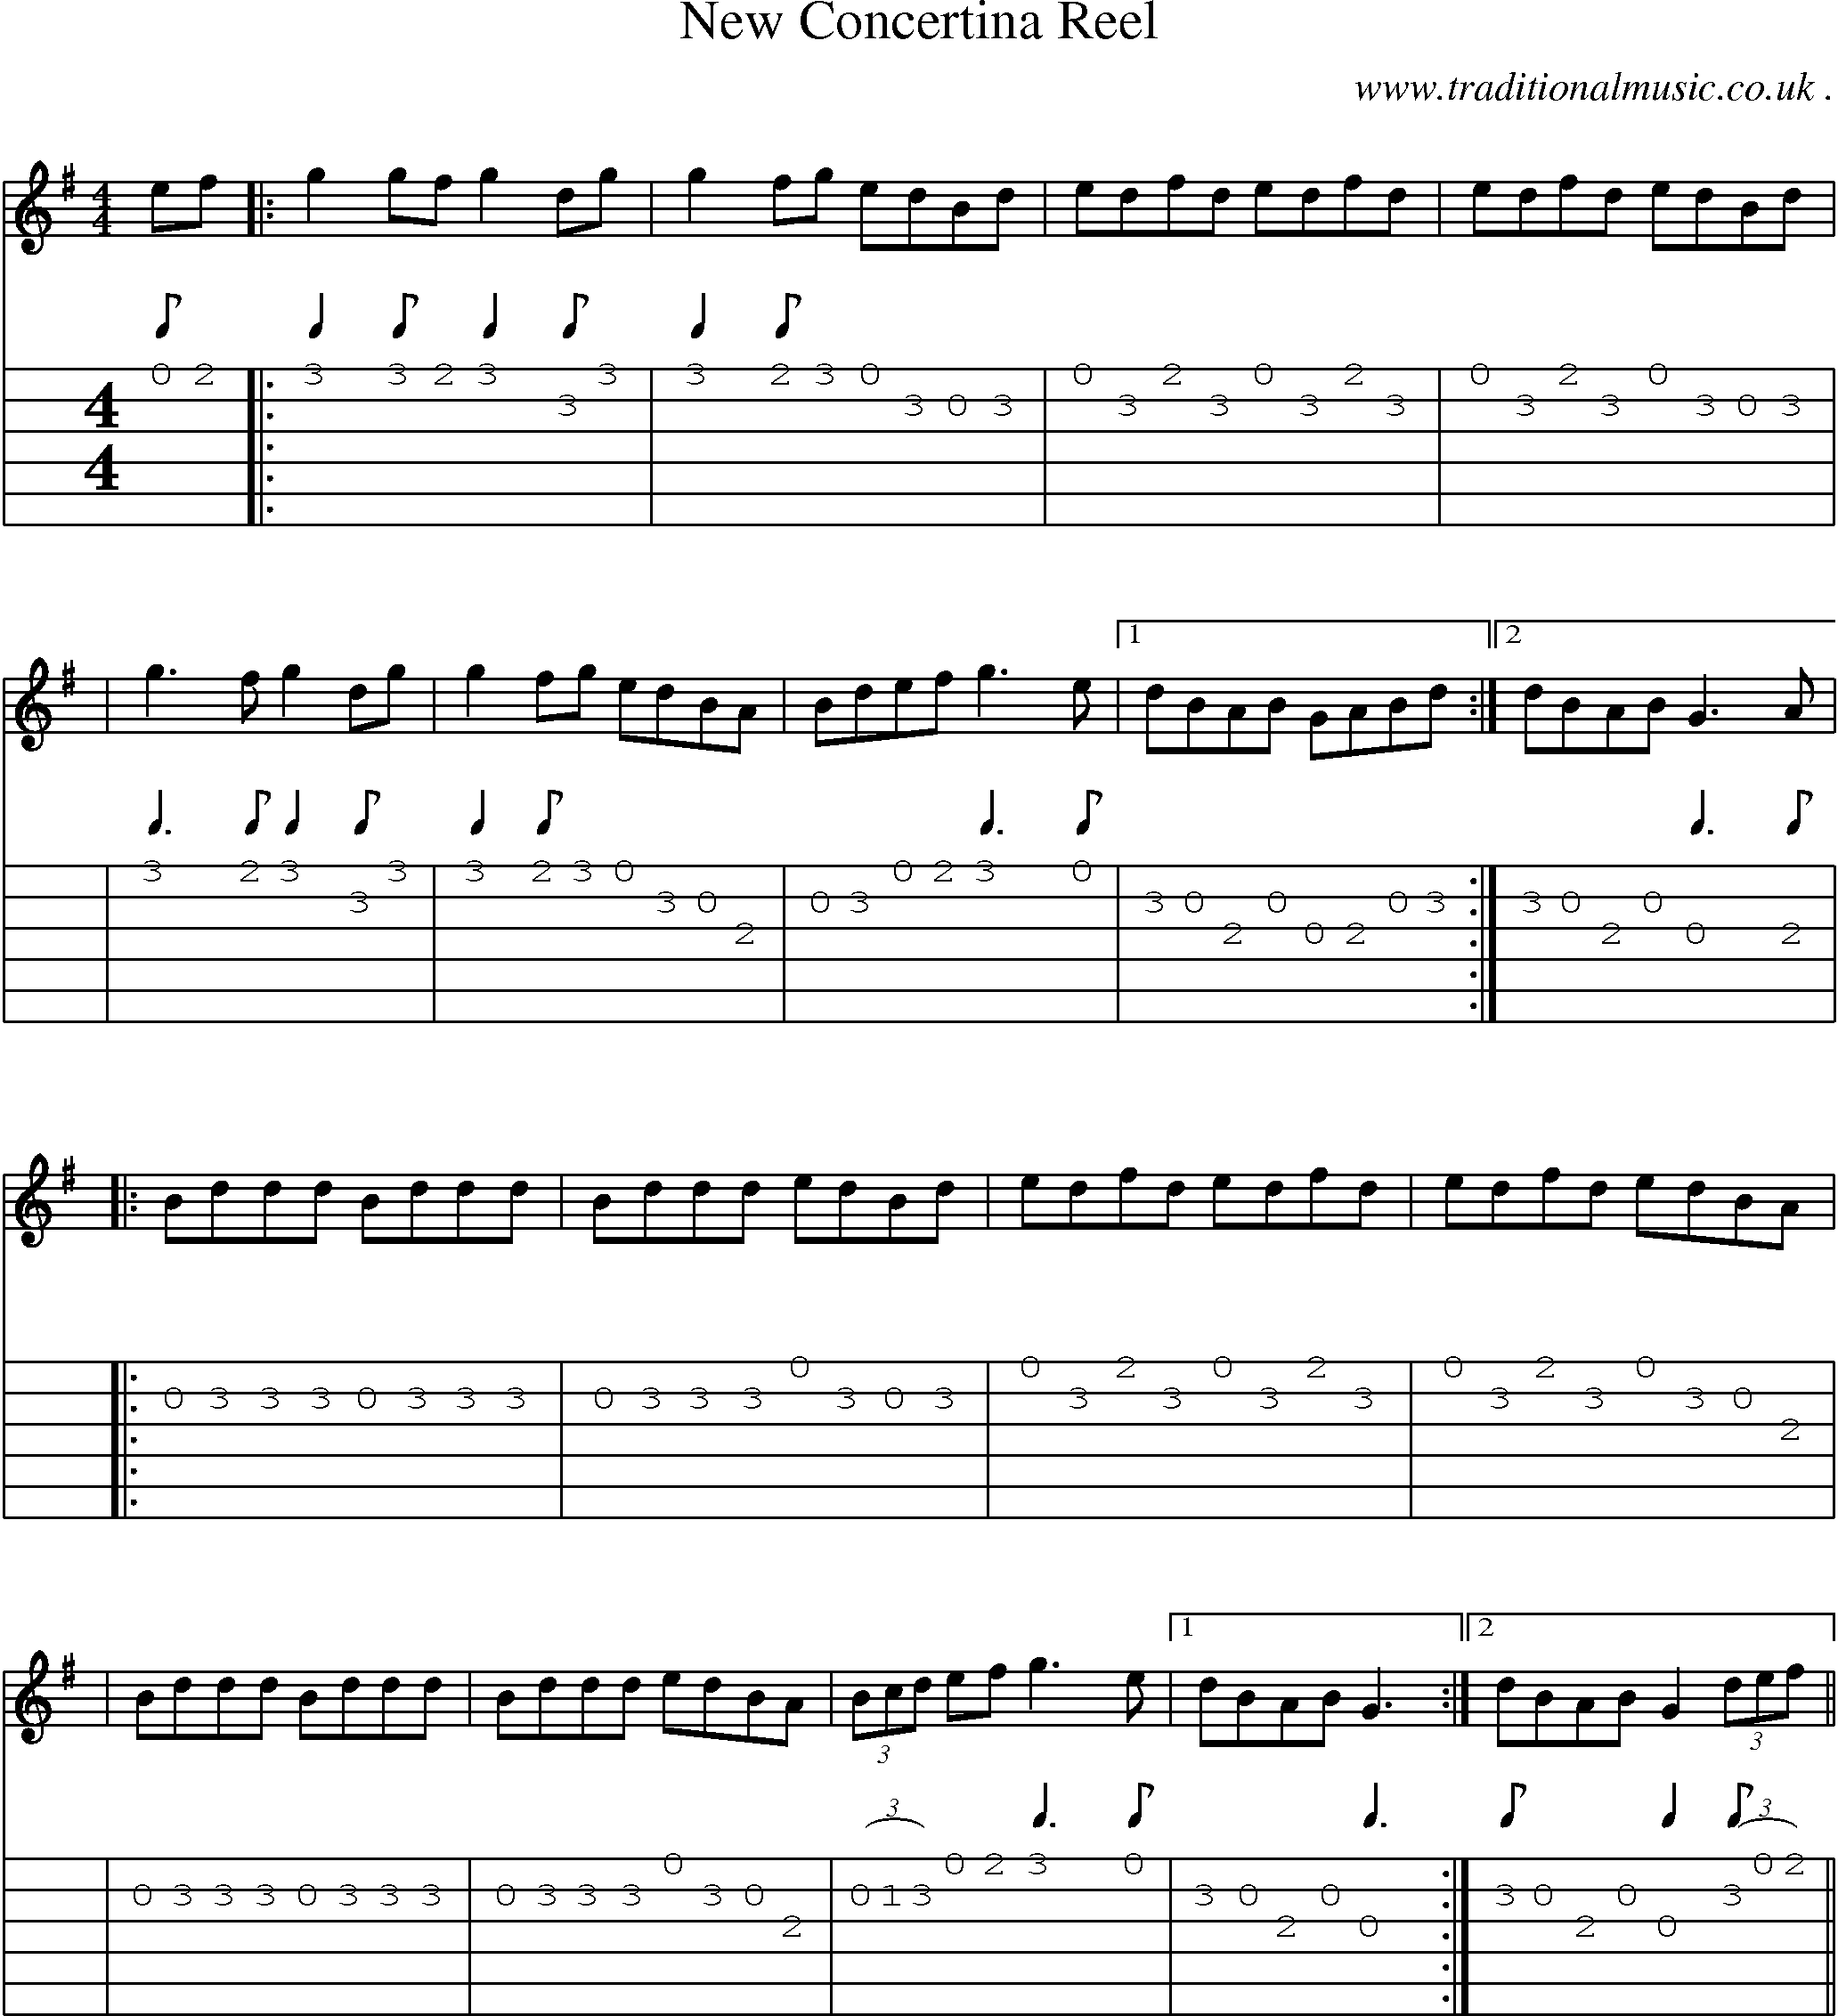 Sheet-Music and Guitar Tabs for New Concertina Reel